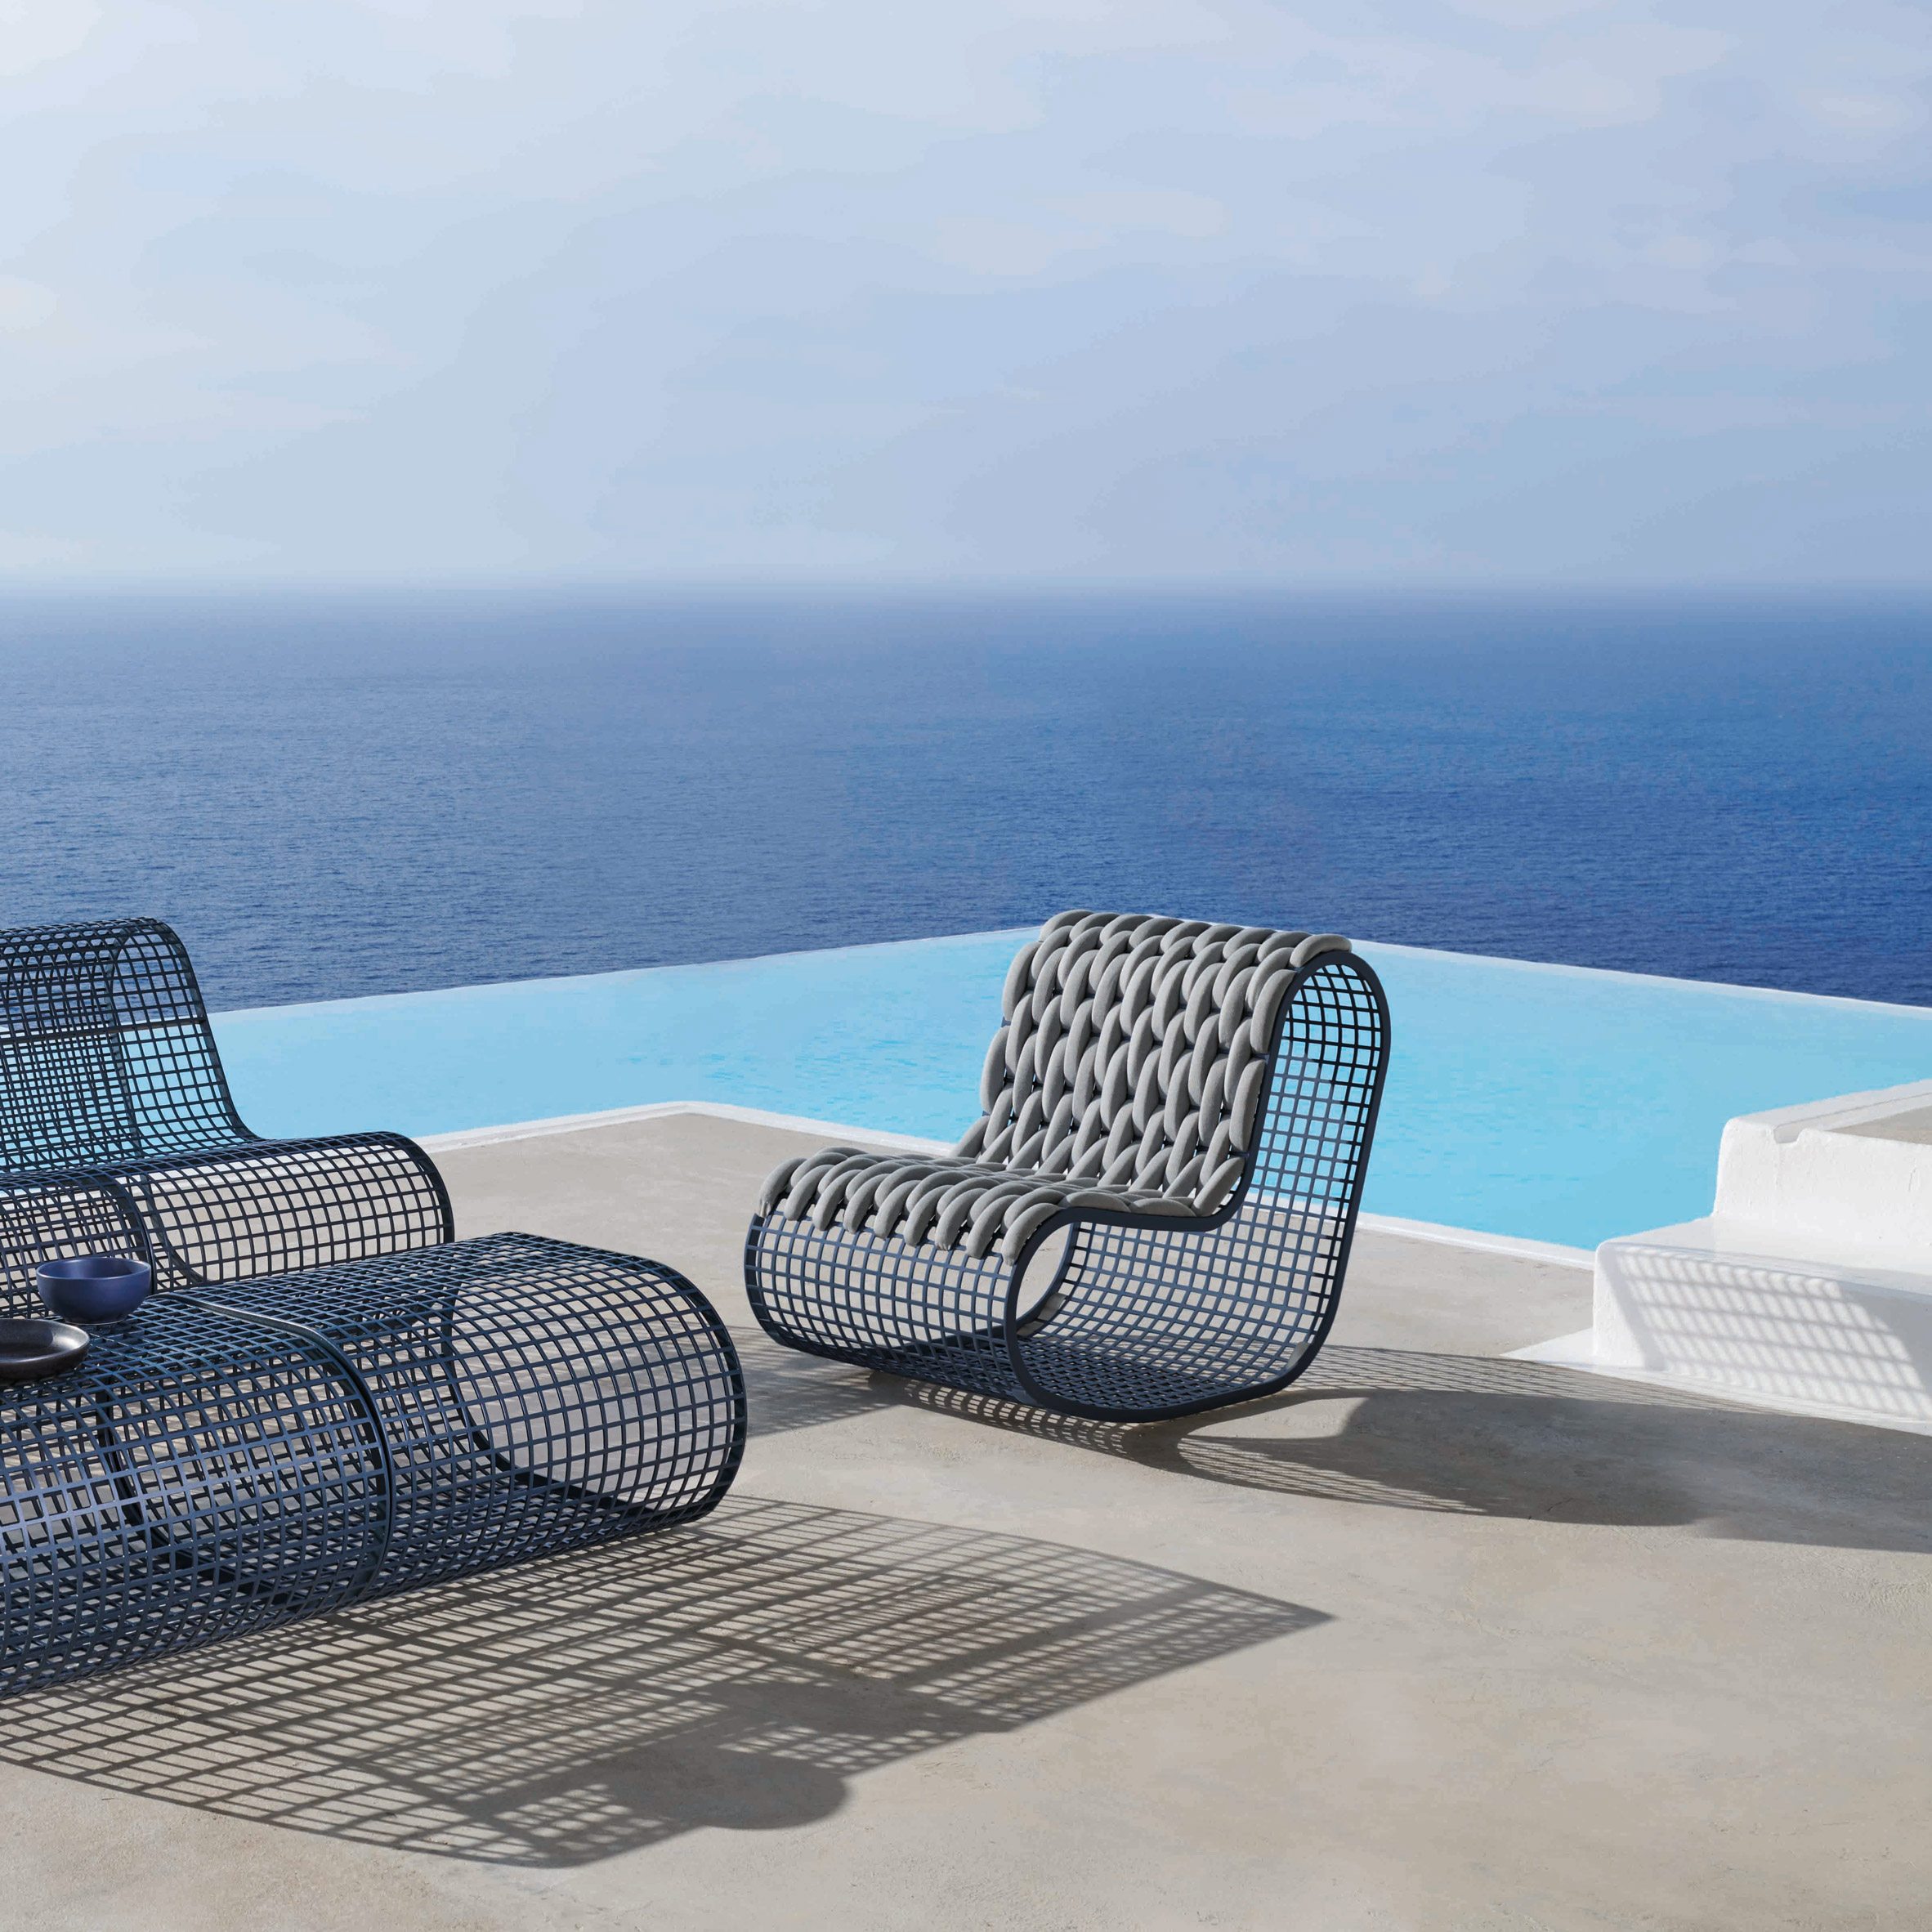 Buit outdoor seating by Gandia Blasco